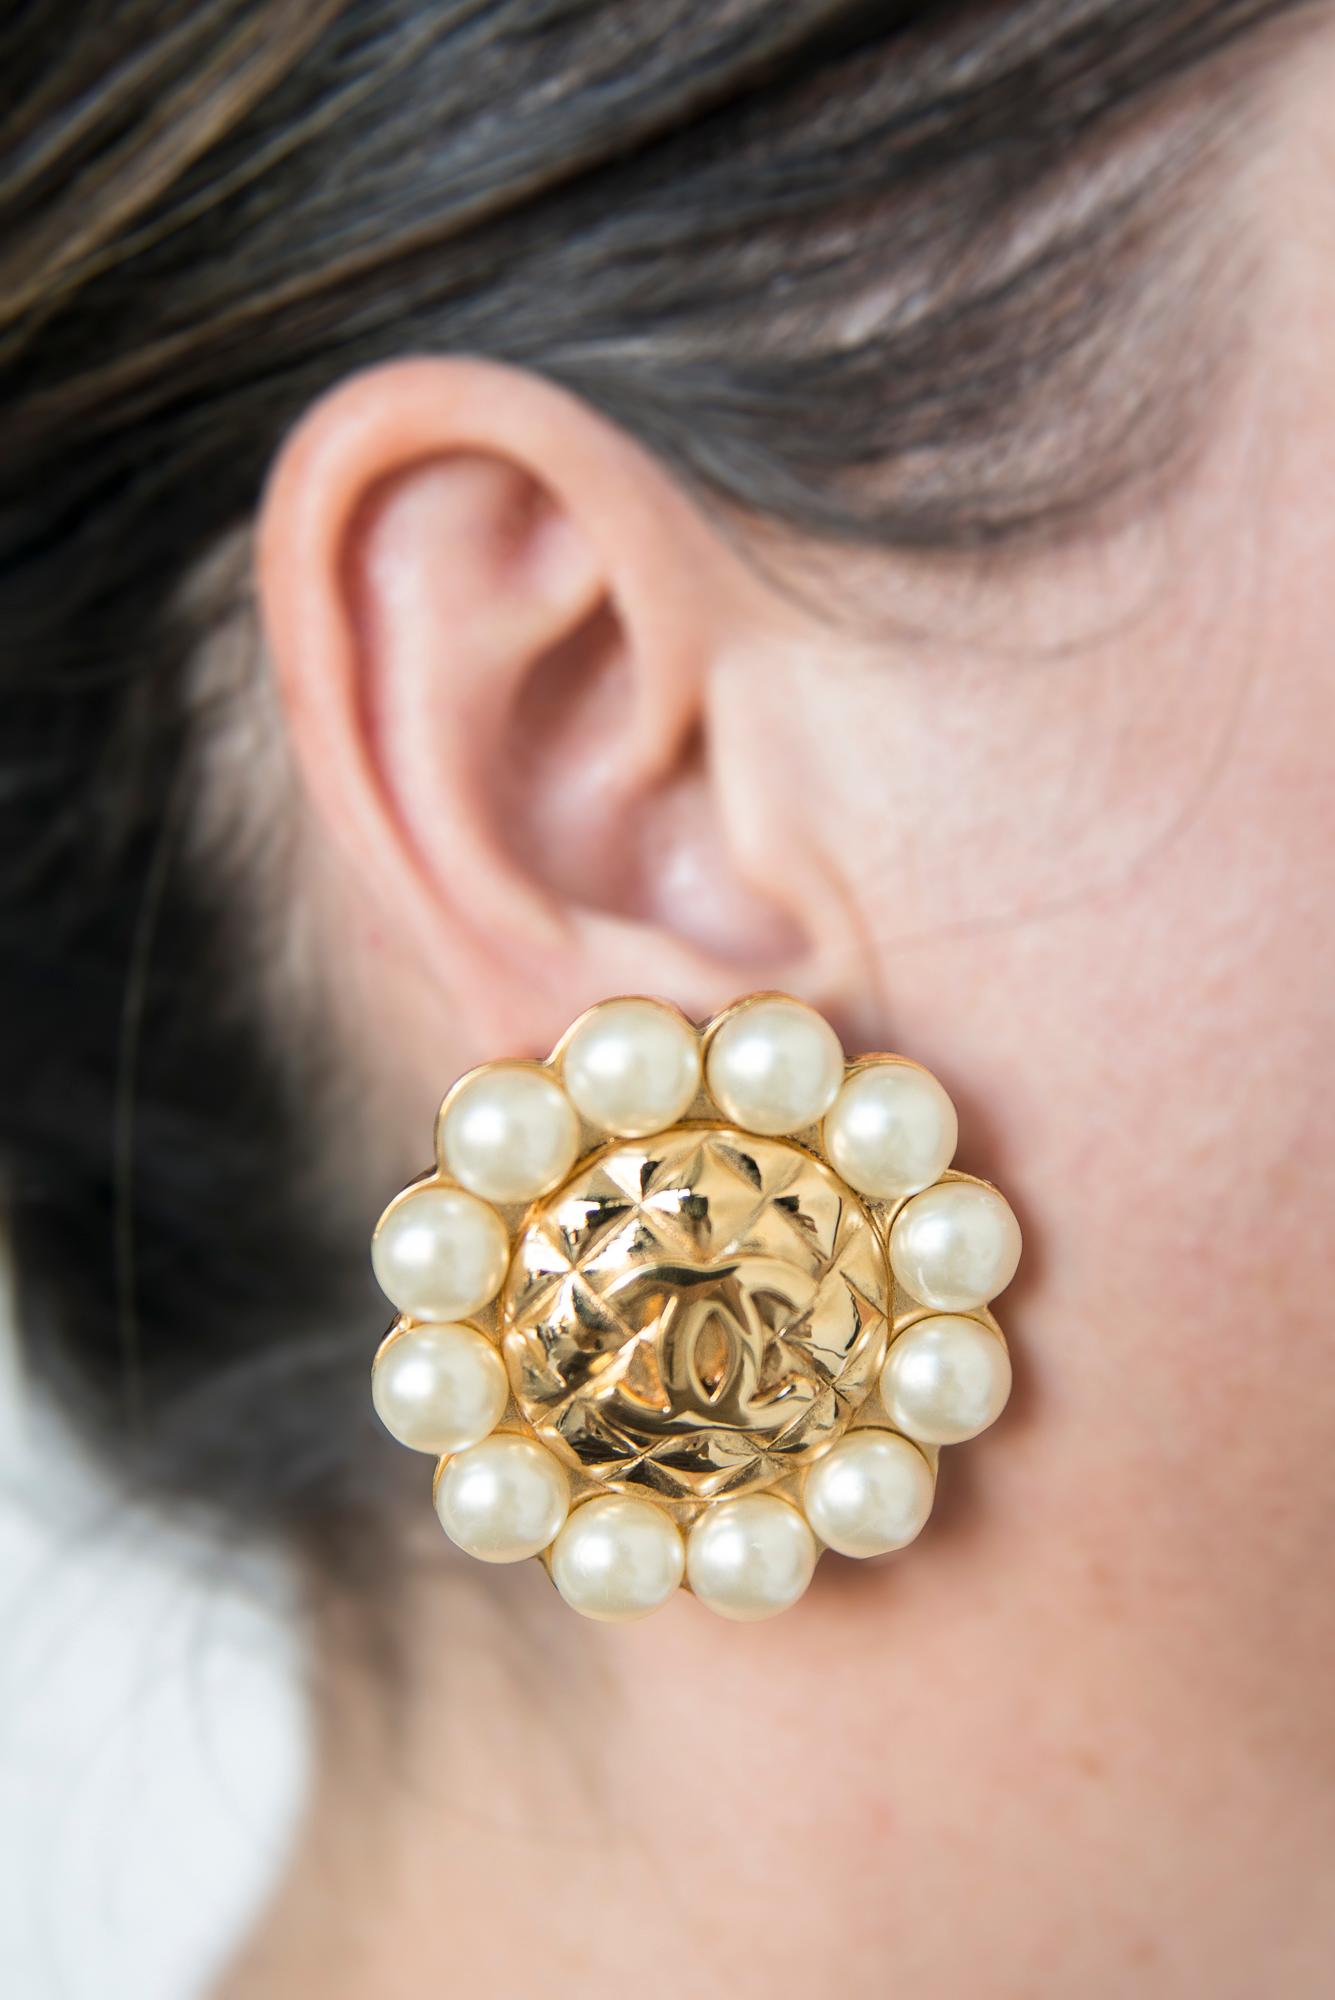 Chanel By Karl Lagerfeld Oversized Gold-Tone & Faux Pearls CC Clip-On Earrings In Good Condition For Sale In Geneva, CH